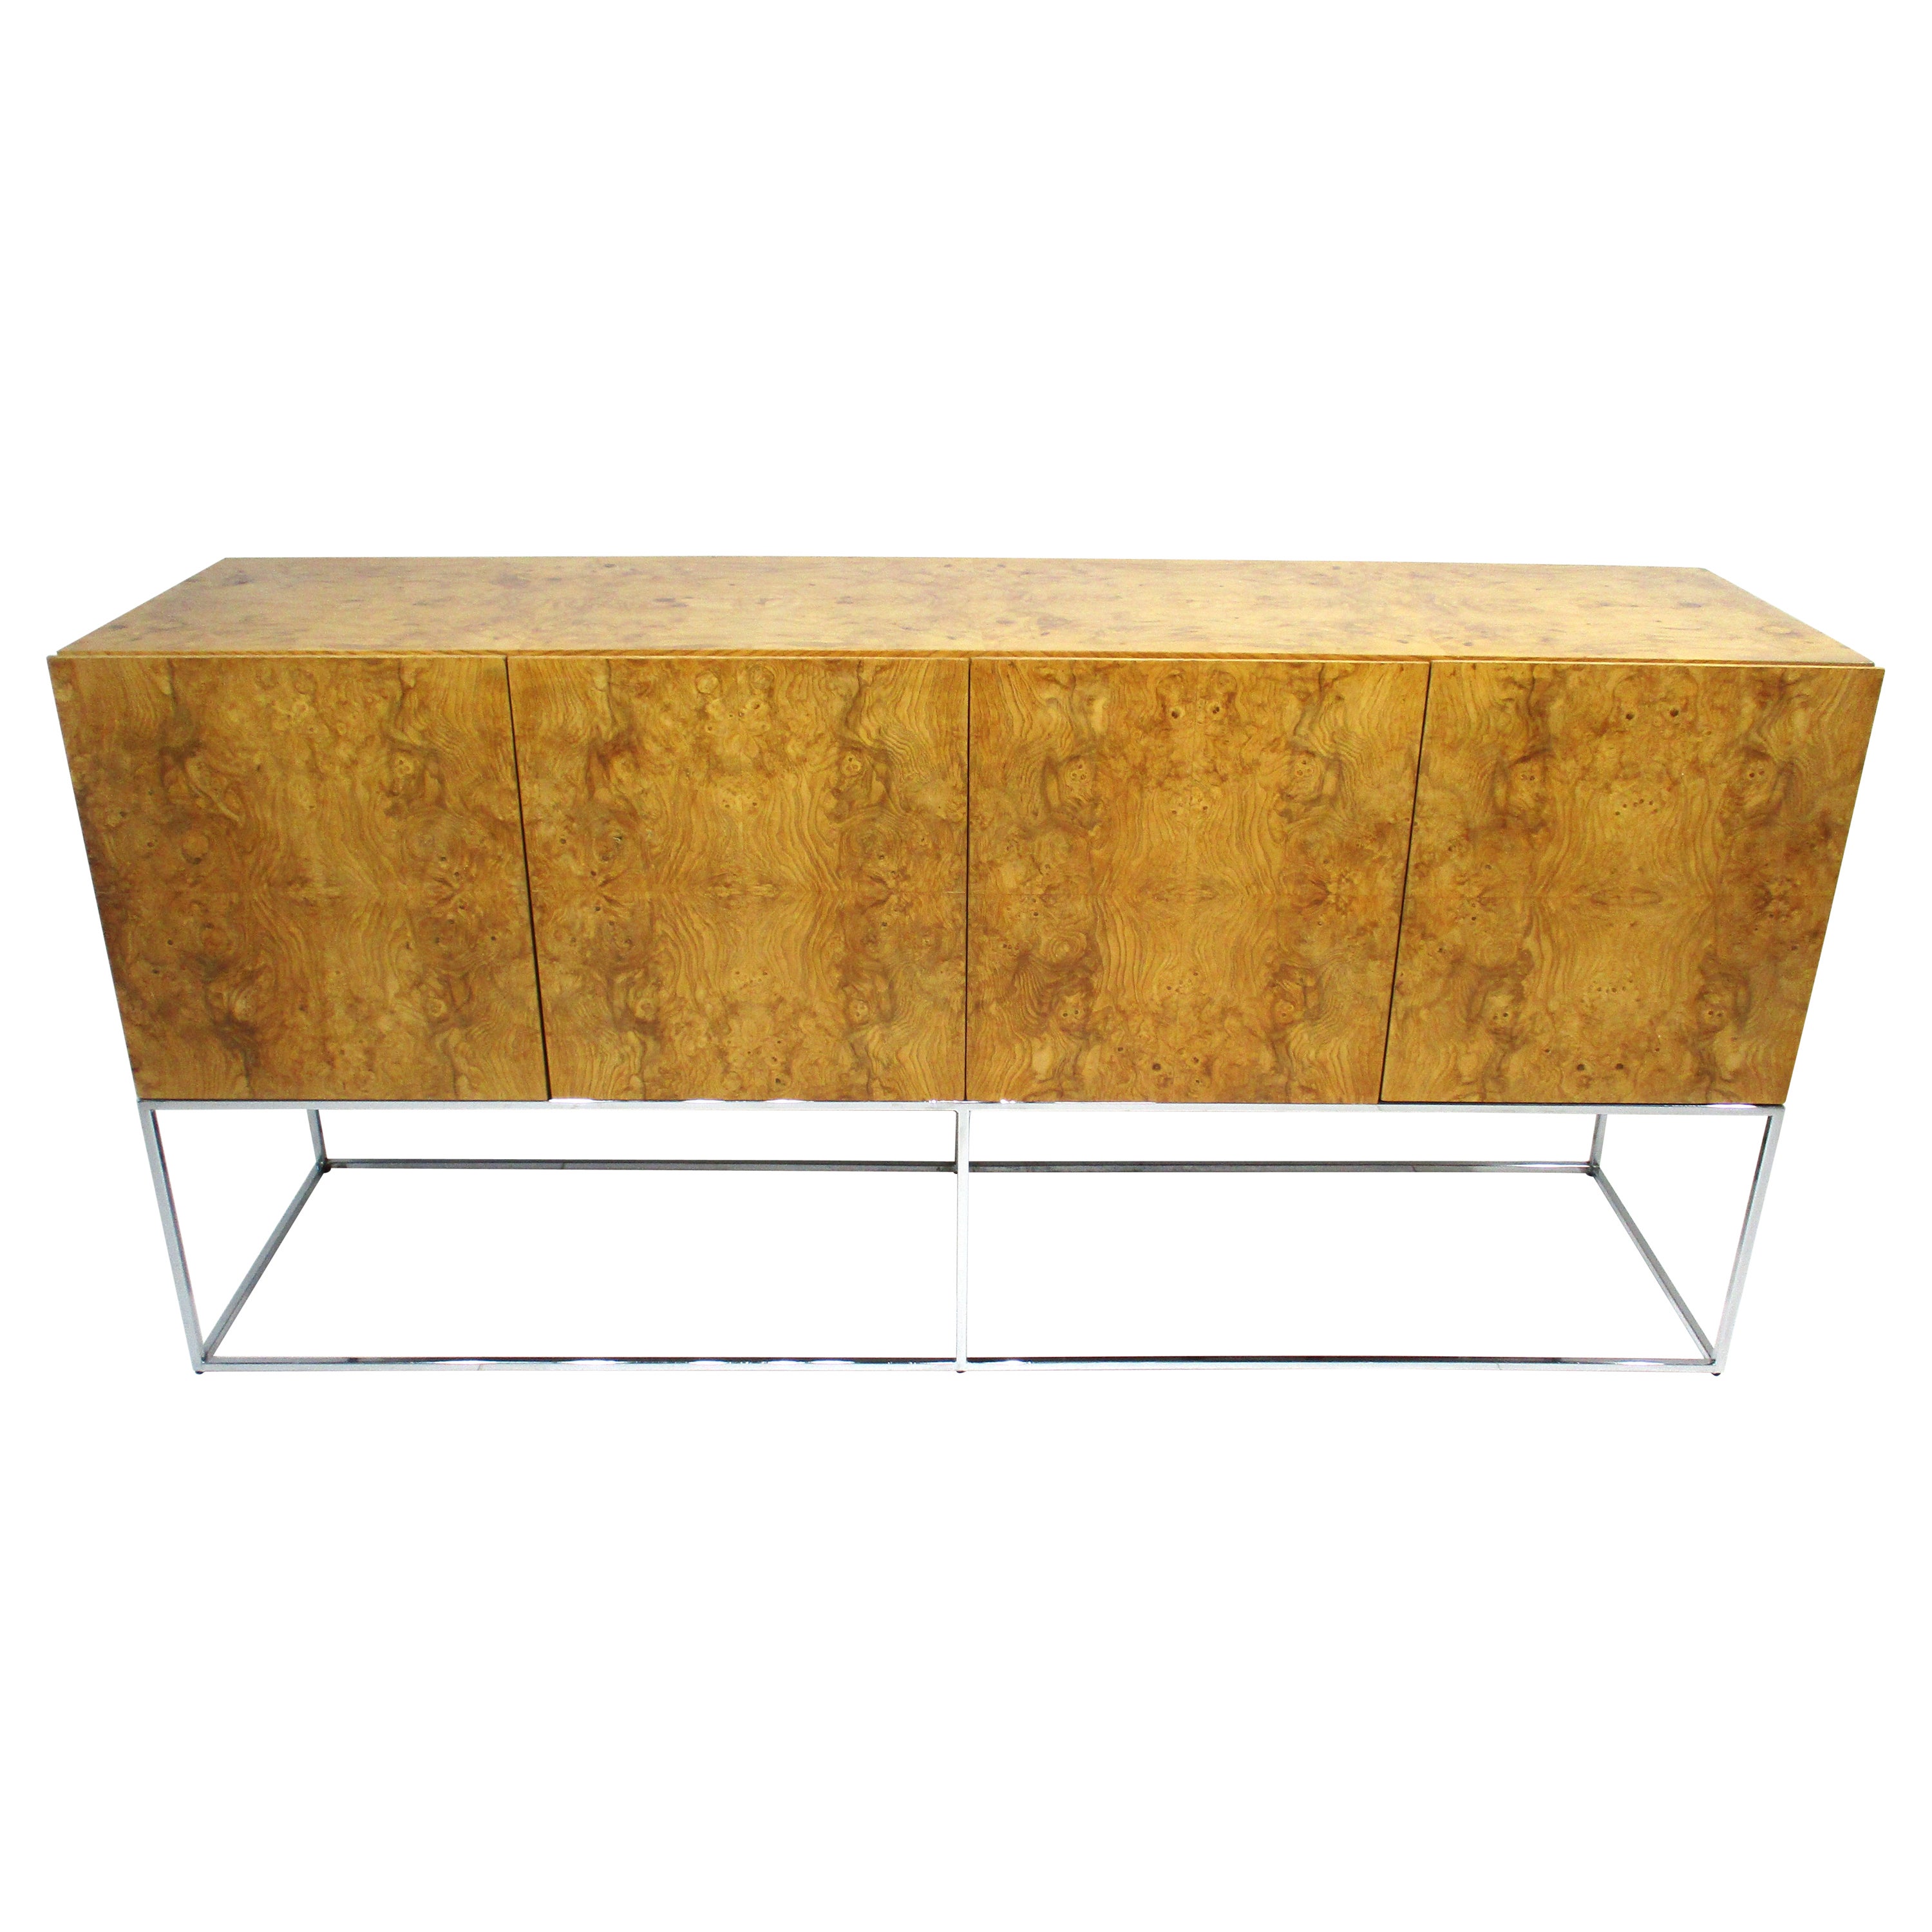 Milo Baughman Olivewood Chrome Credenza or Server by Thayer Coggin For Sale